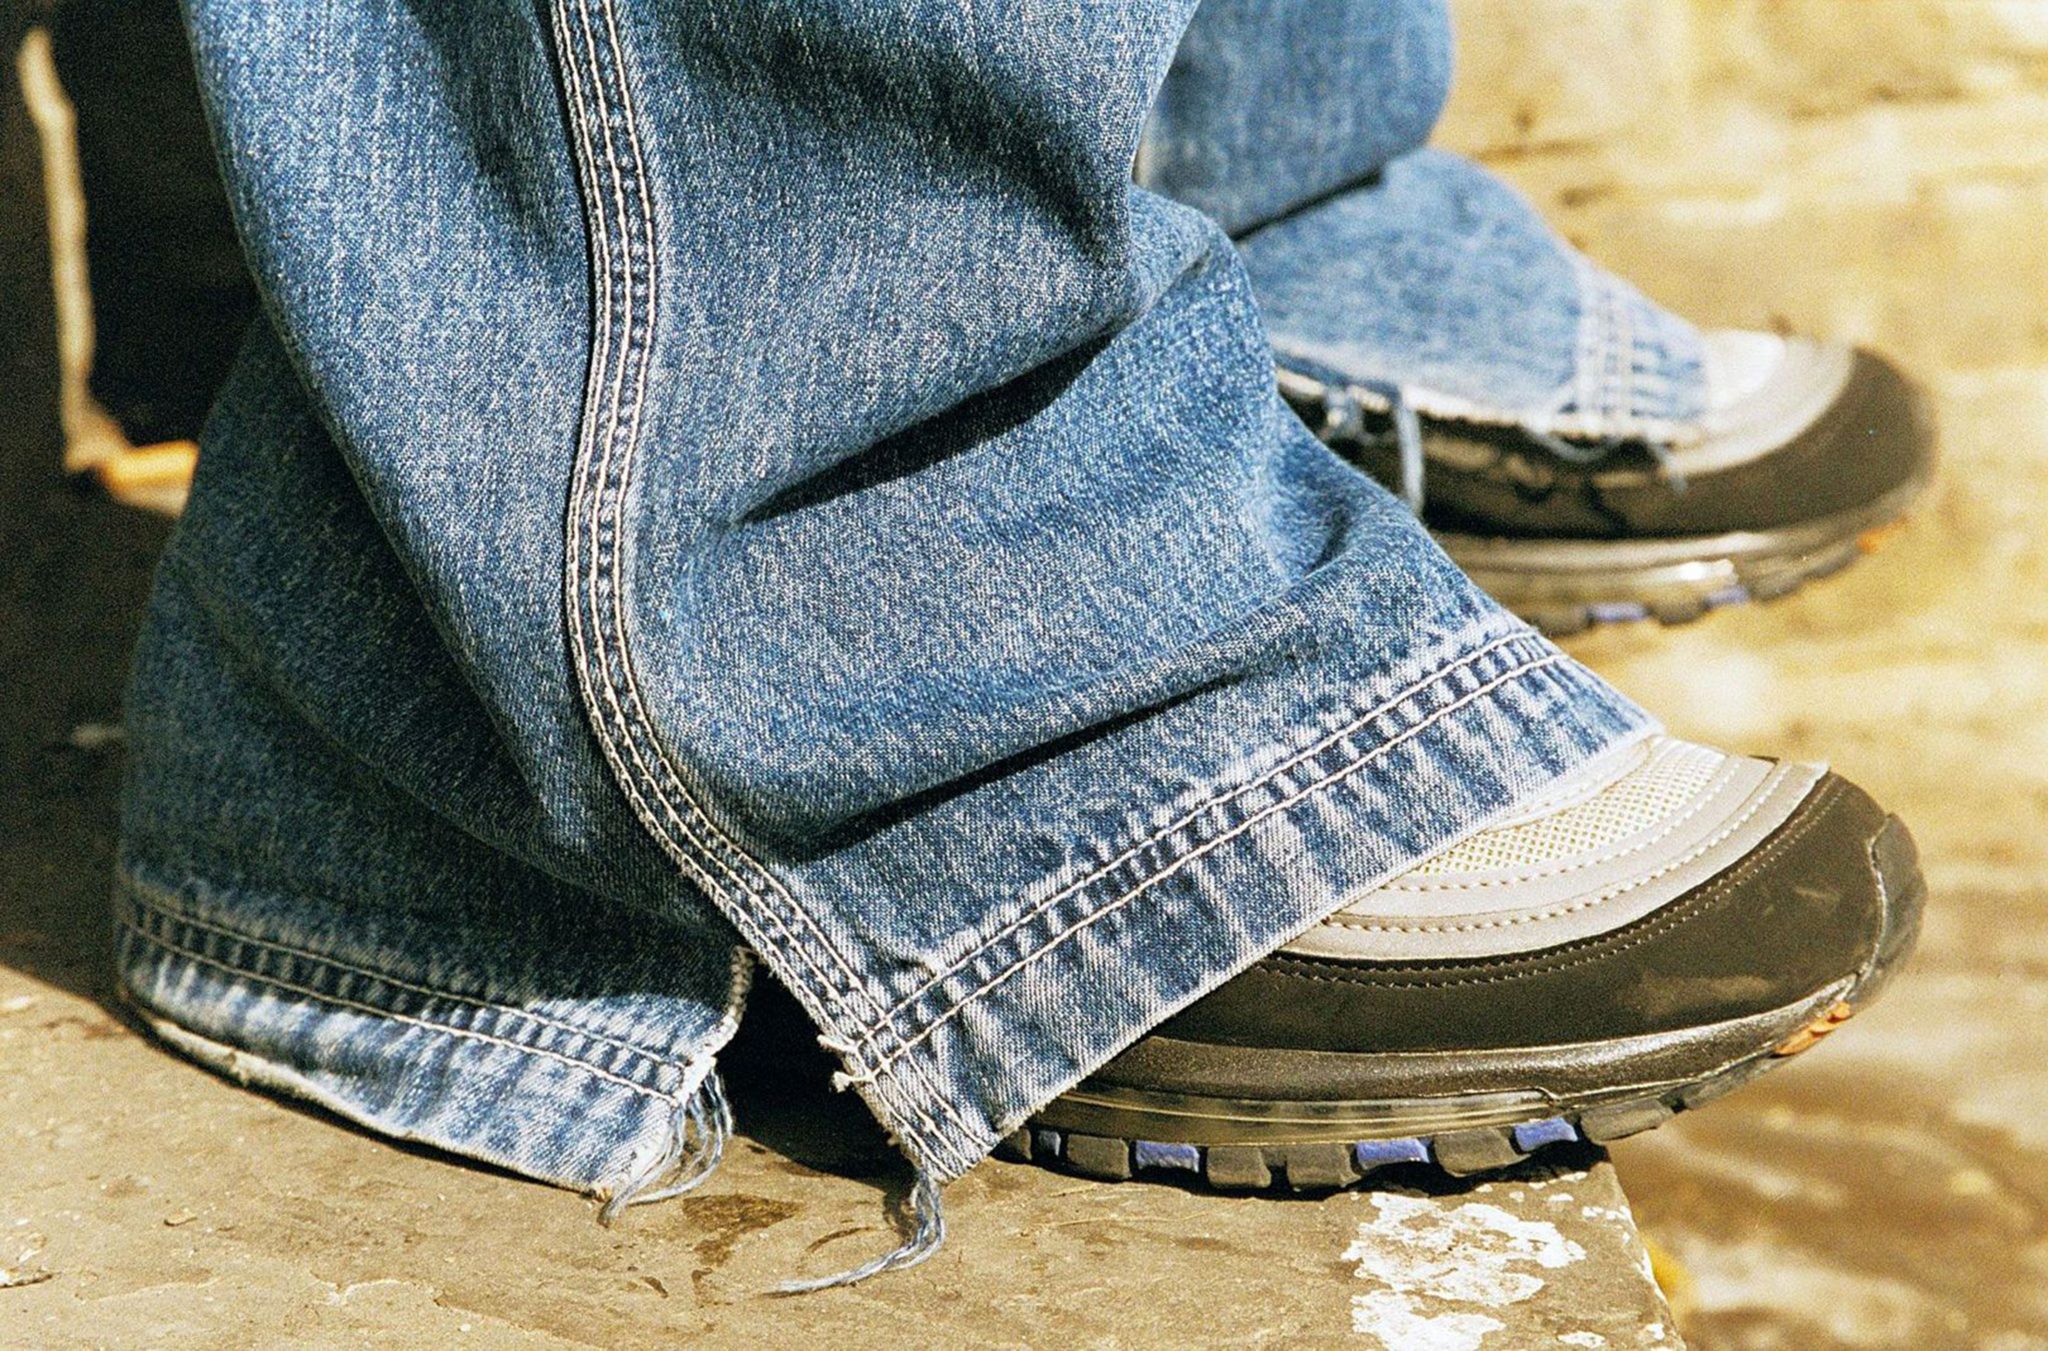 bootcut jeans and sneakers